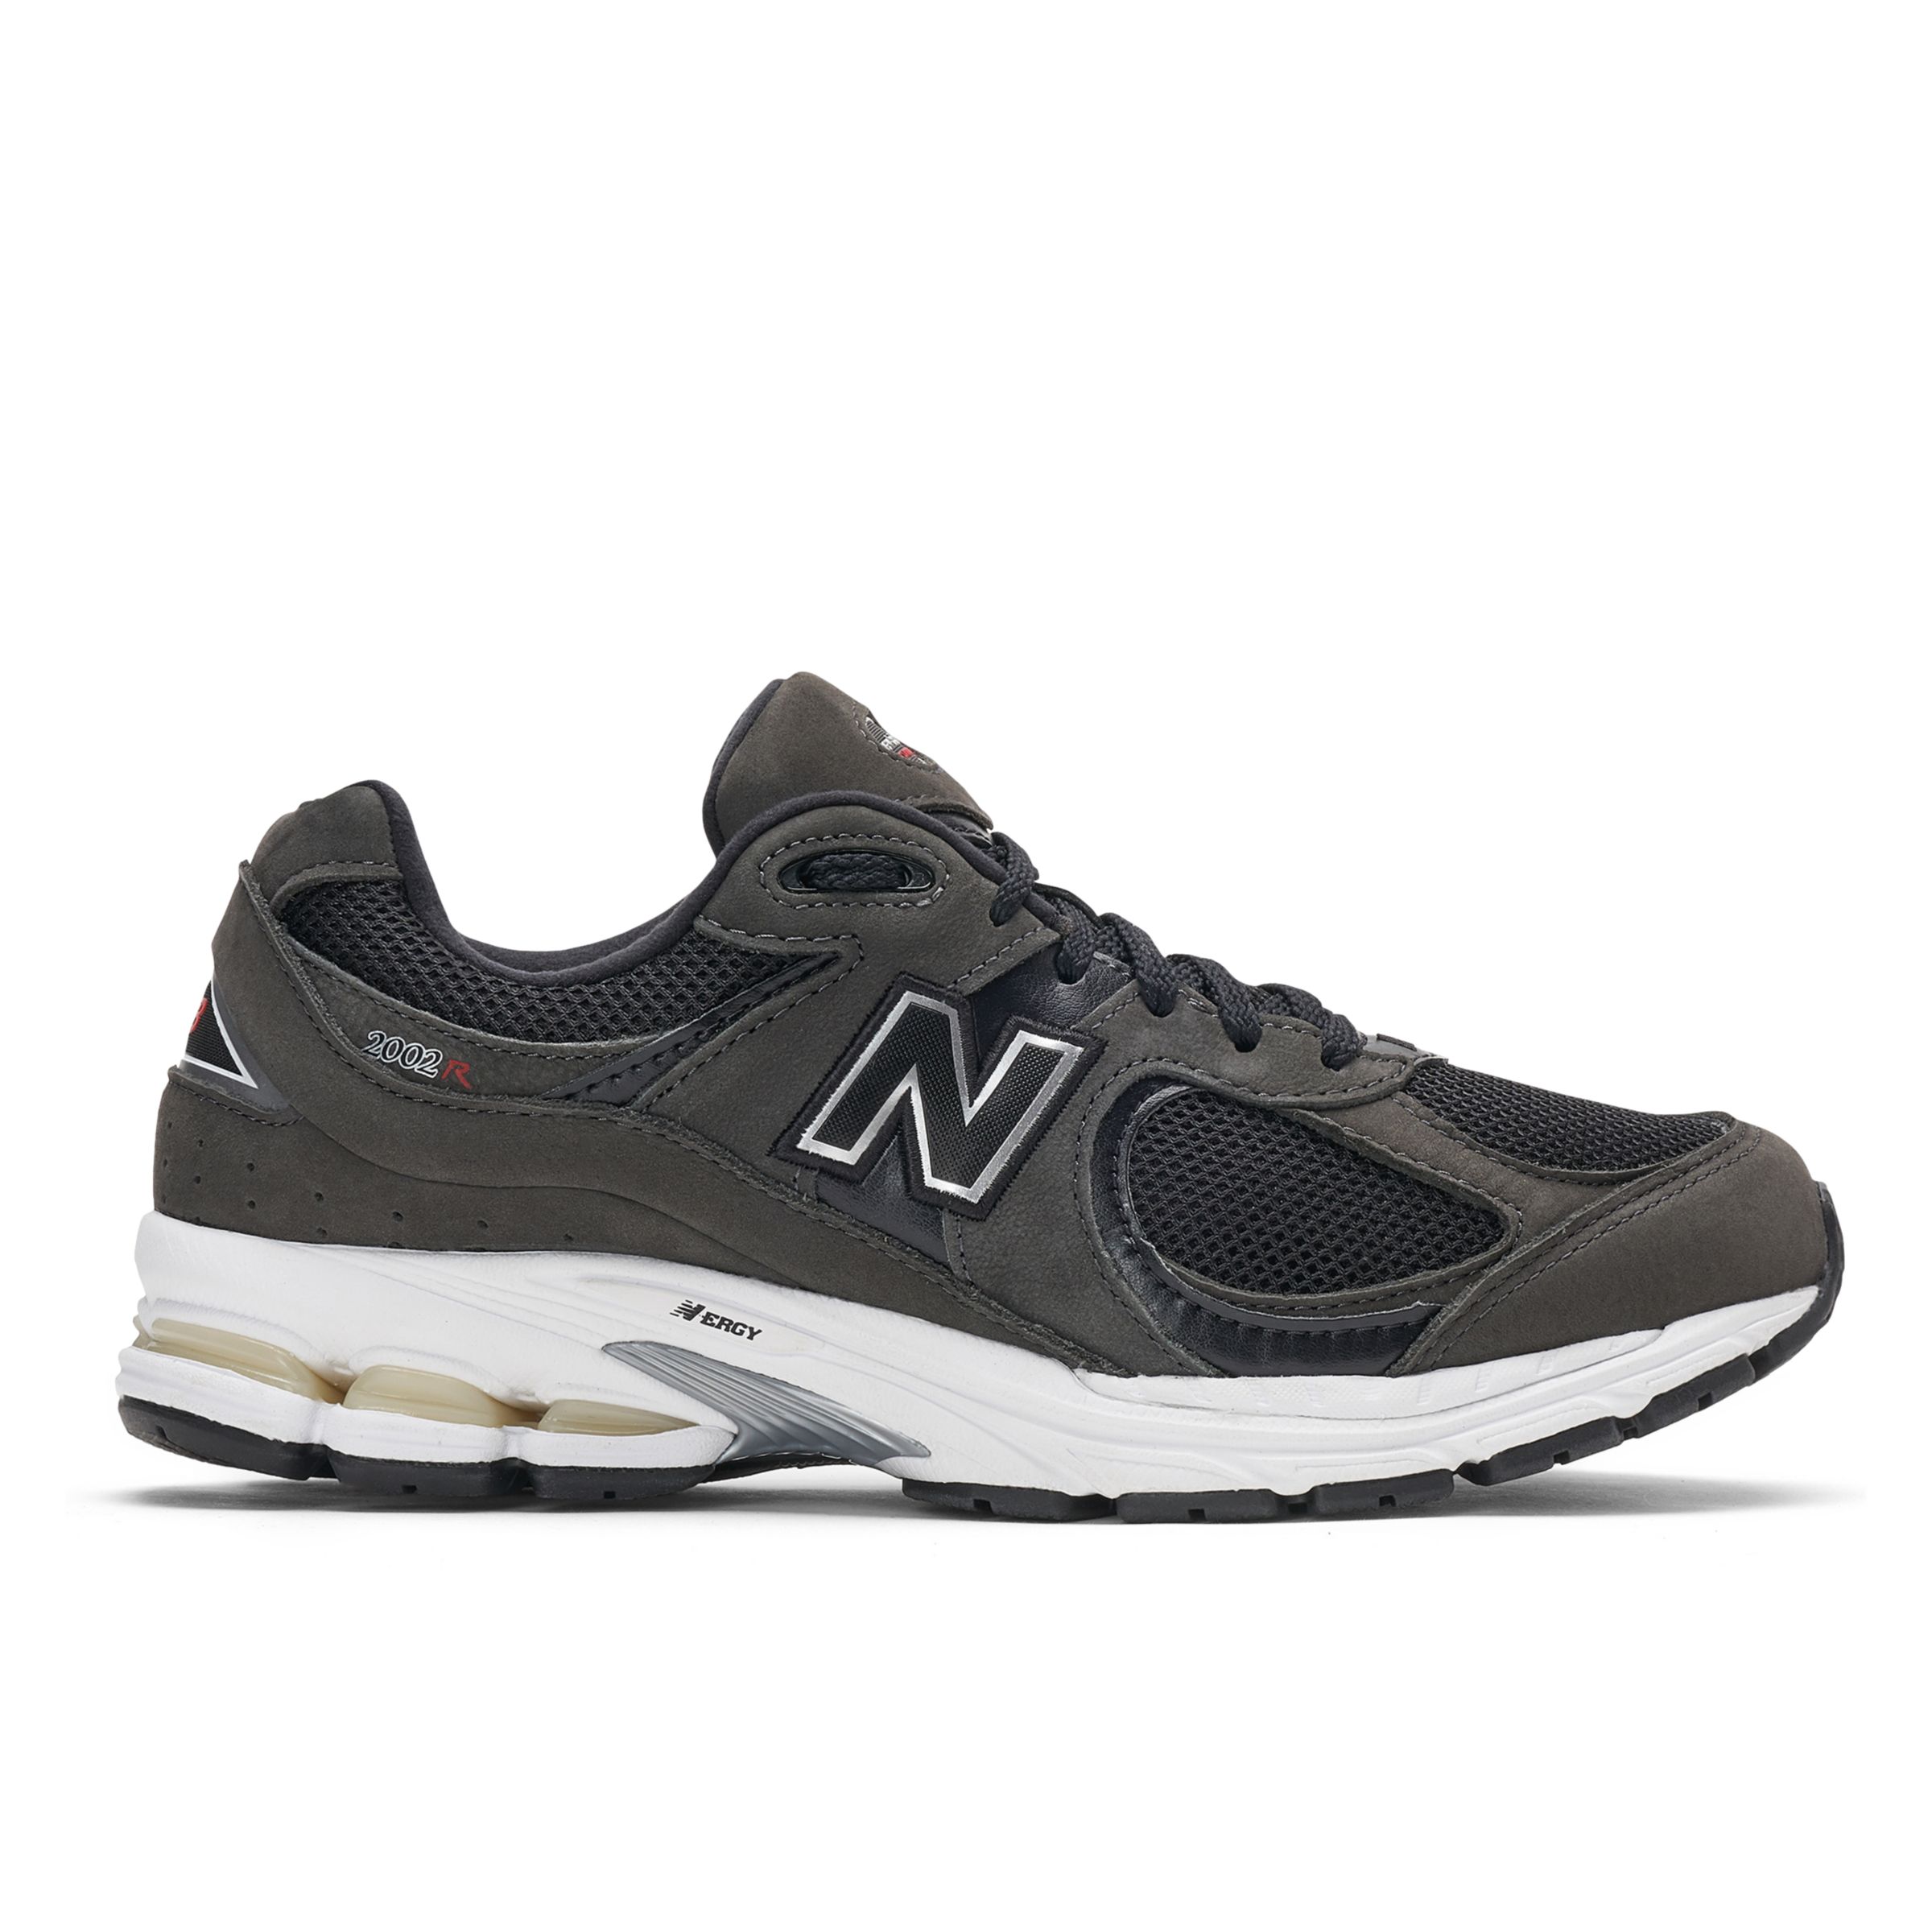 2002R Men's Fashion Sneakers | Style & Comfort - New Balance